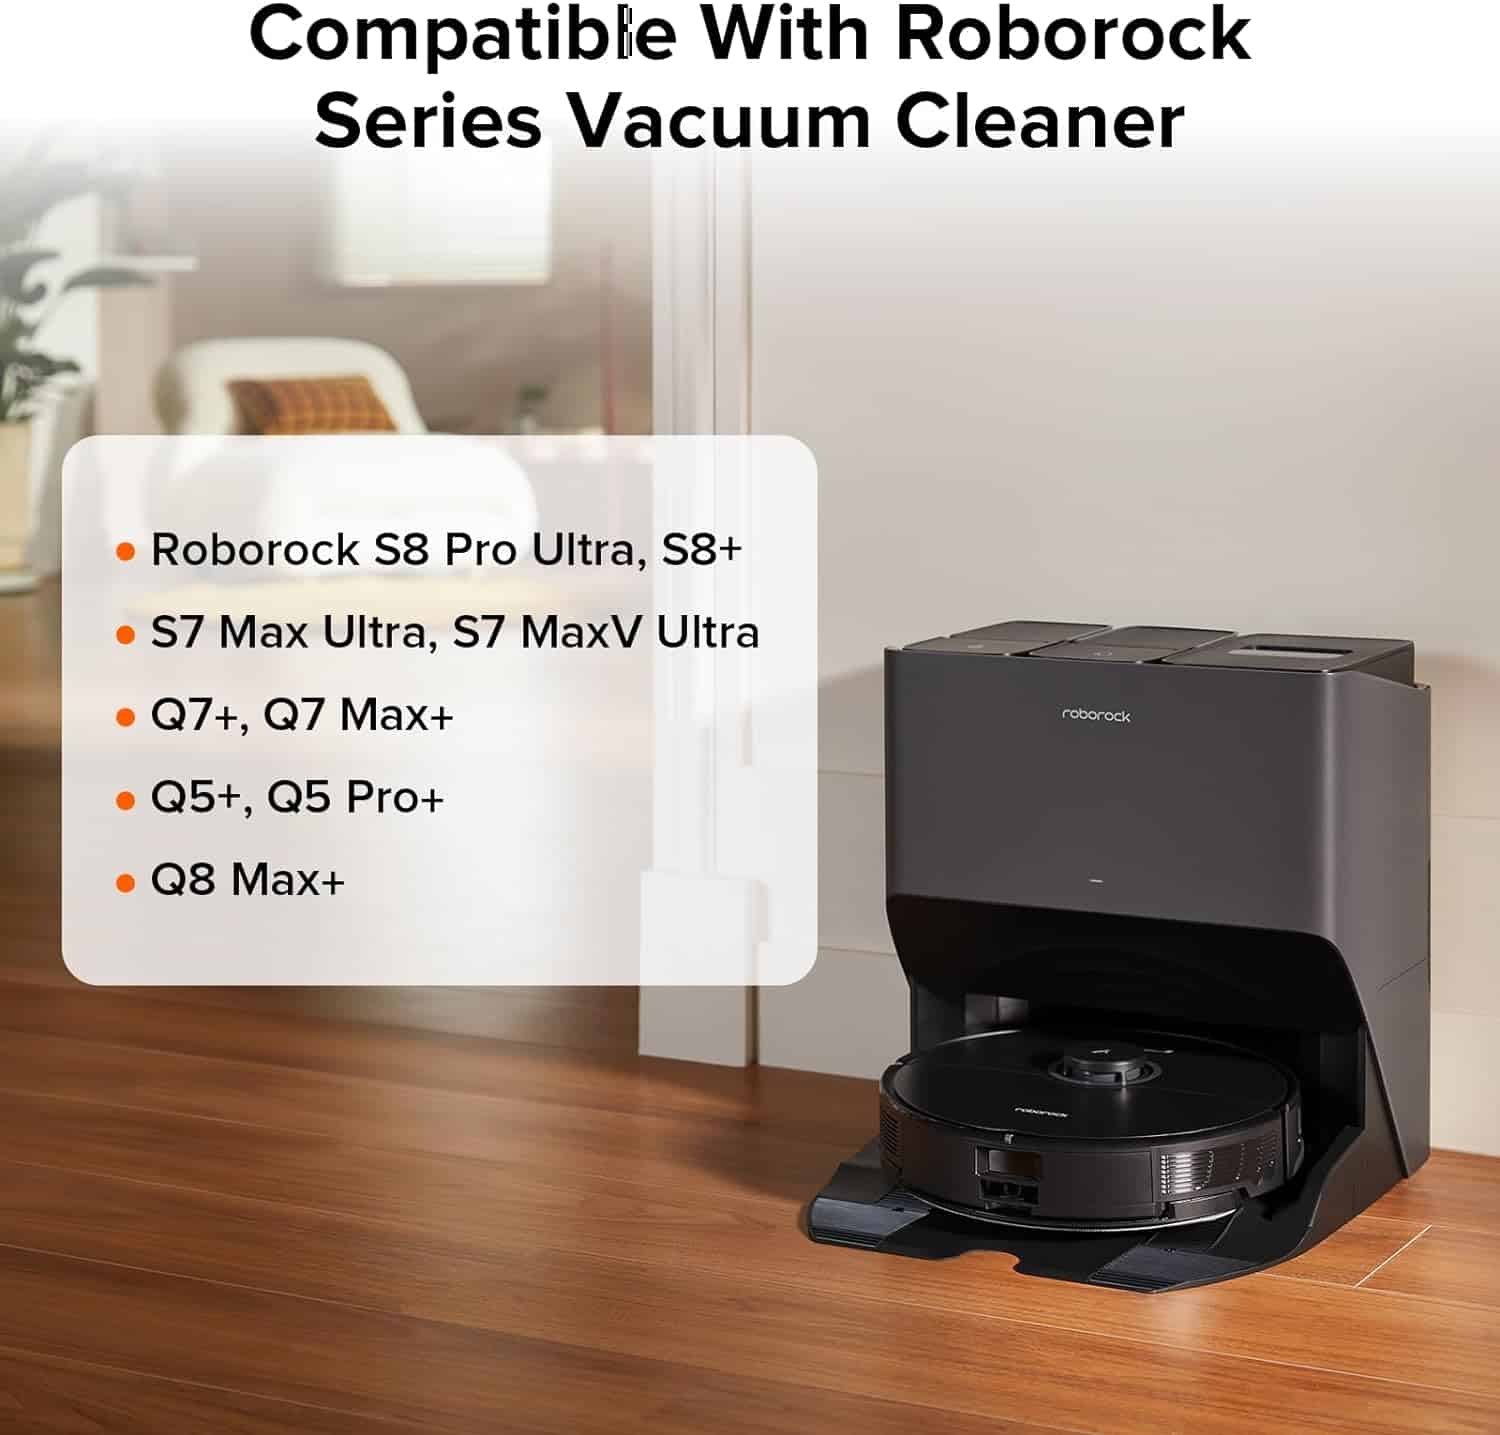 Upgrade Your Cleaning Routine with roborock 6 Packs Disposal Vacuum Bags